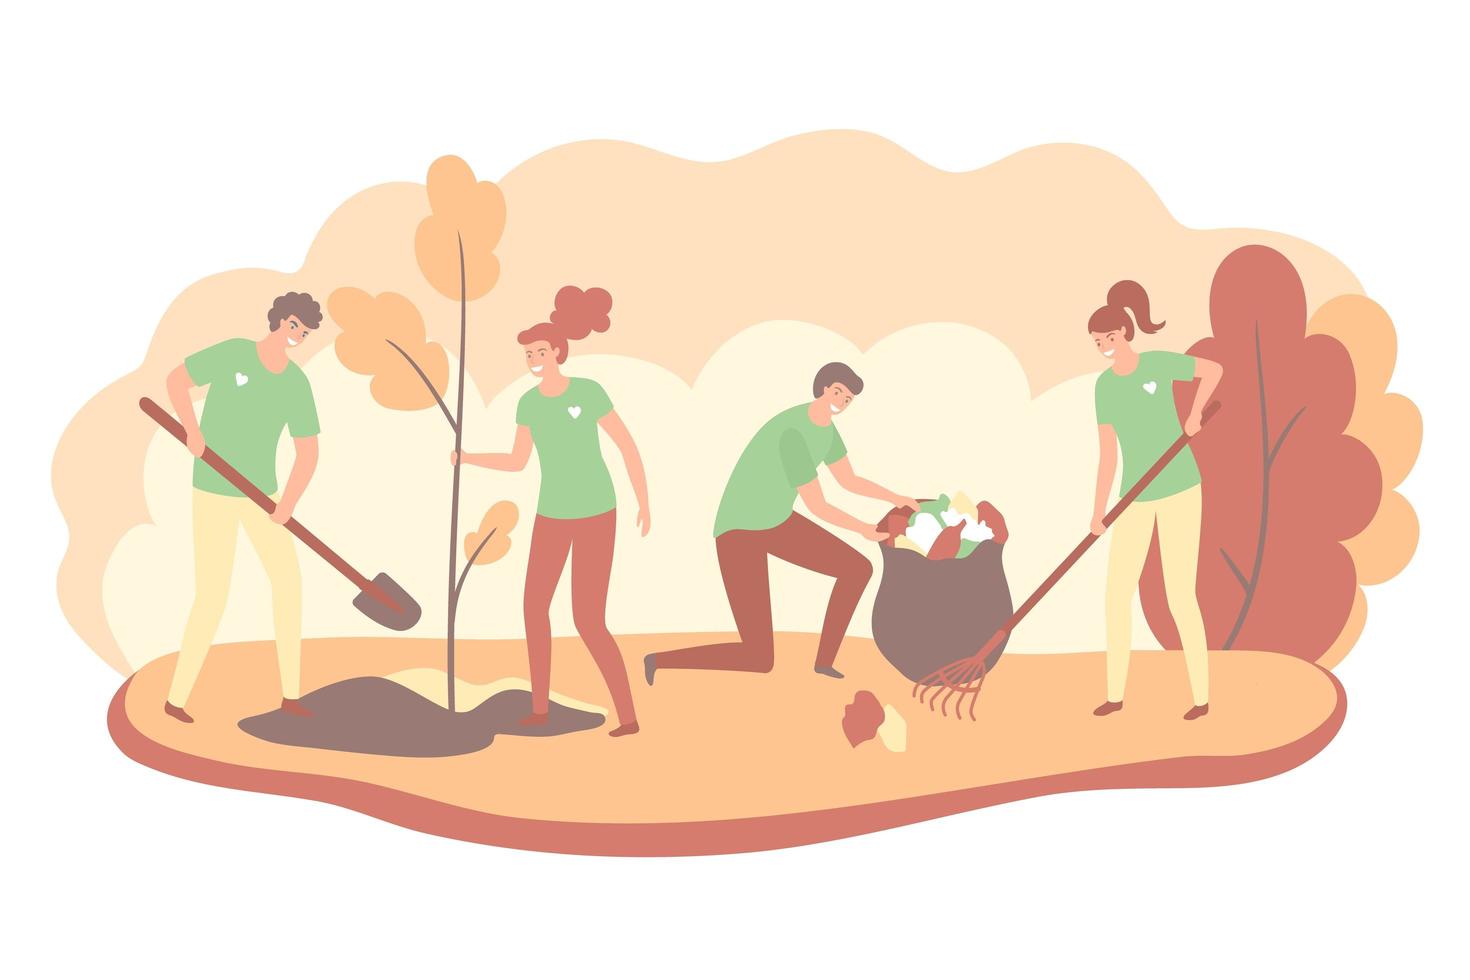 Volunteers cooperating together and cleaning up autimn city park, they are collecting and separating waste, environmental protection concept. Vector illustration.